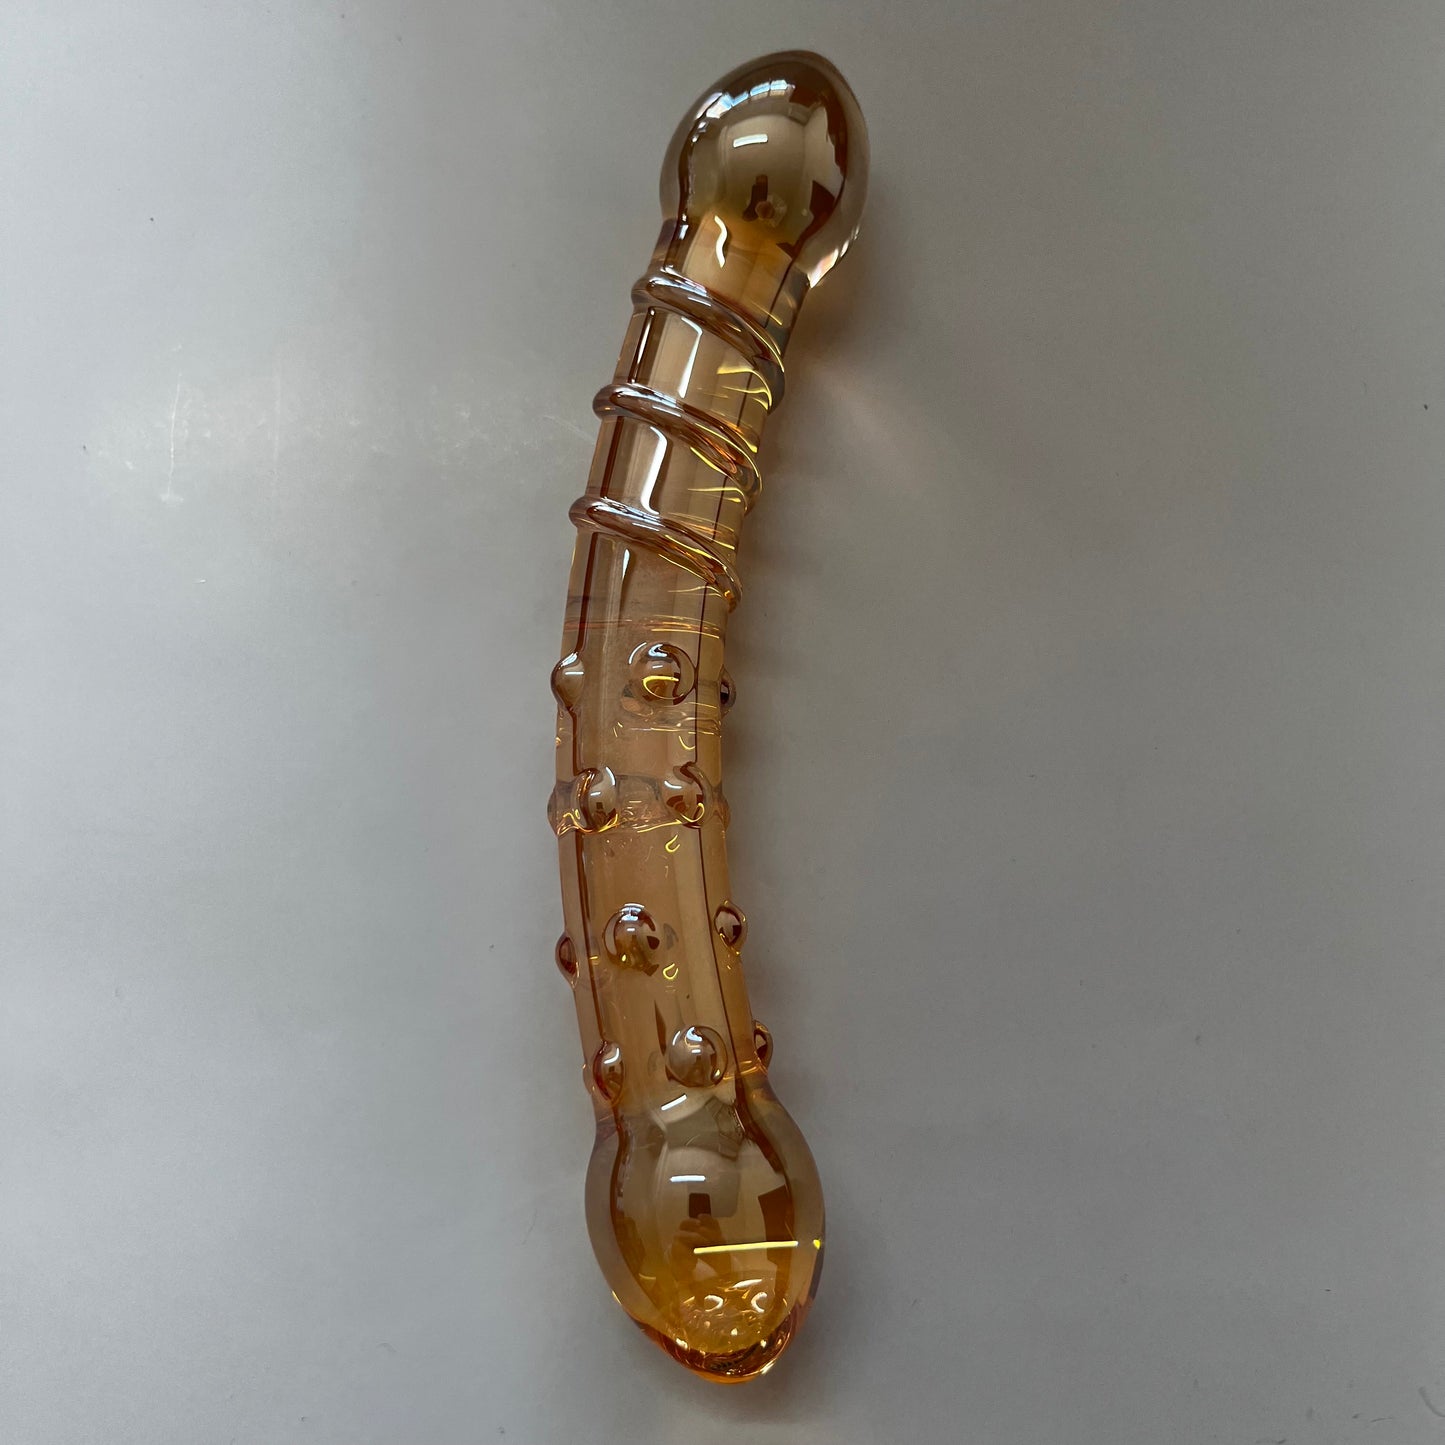 GLASS DILDO YELLOW SHINE DOUBLE ENDED